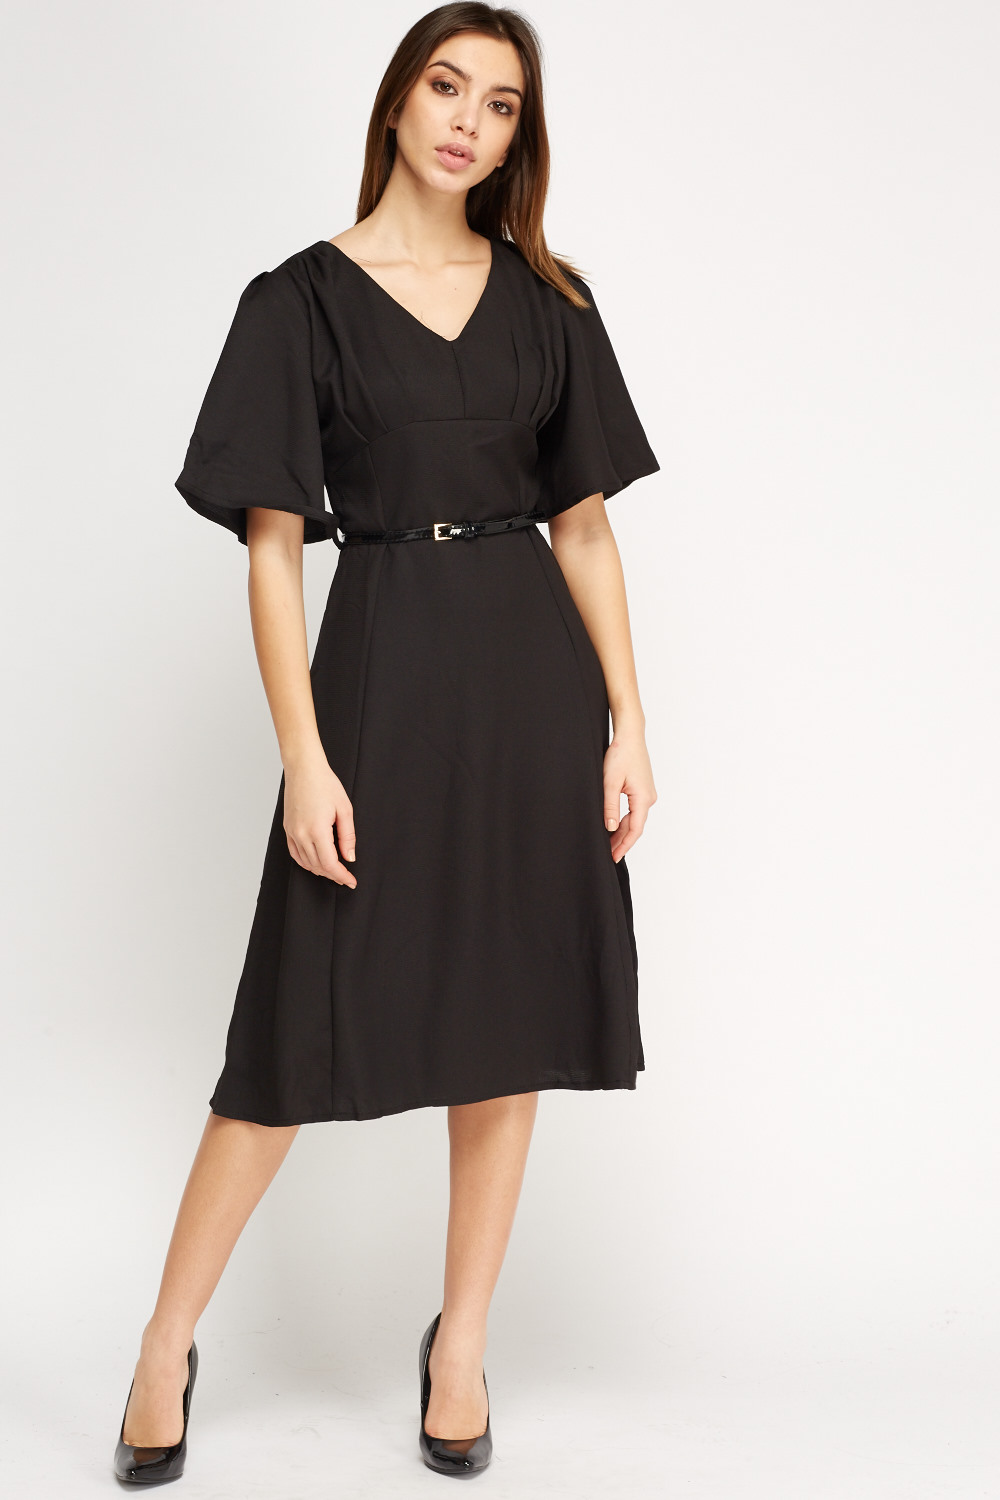 Textured Belted Swing Dress - Just $3